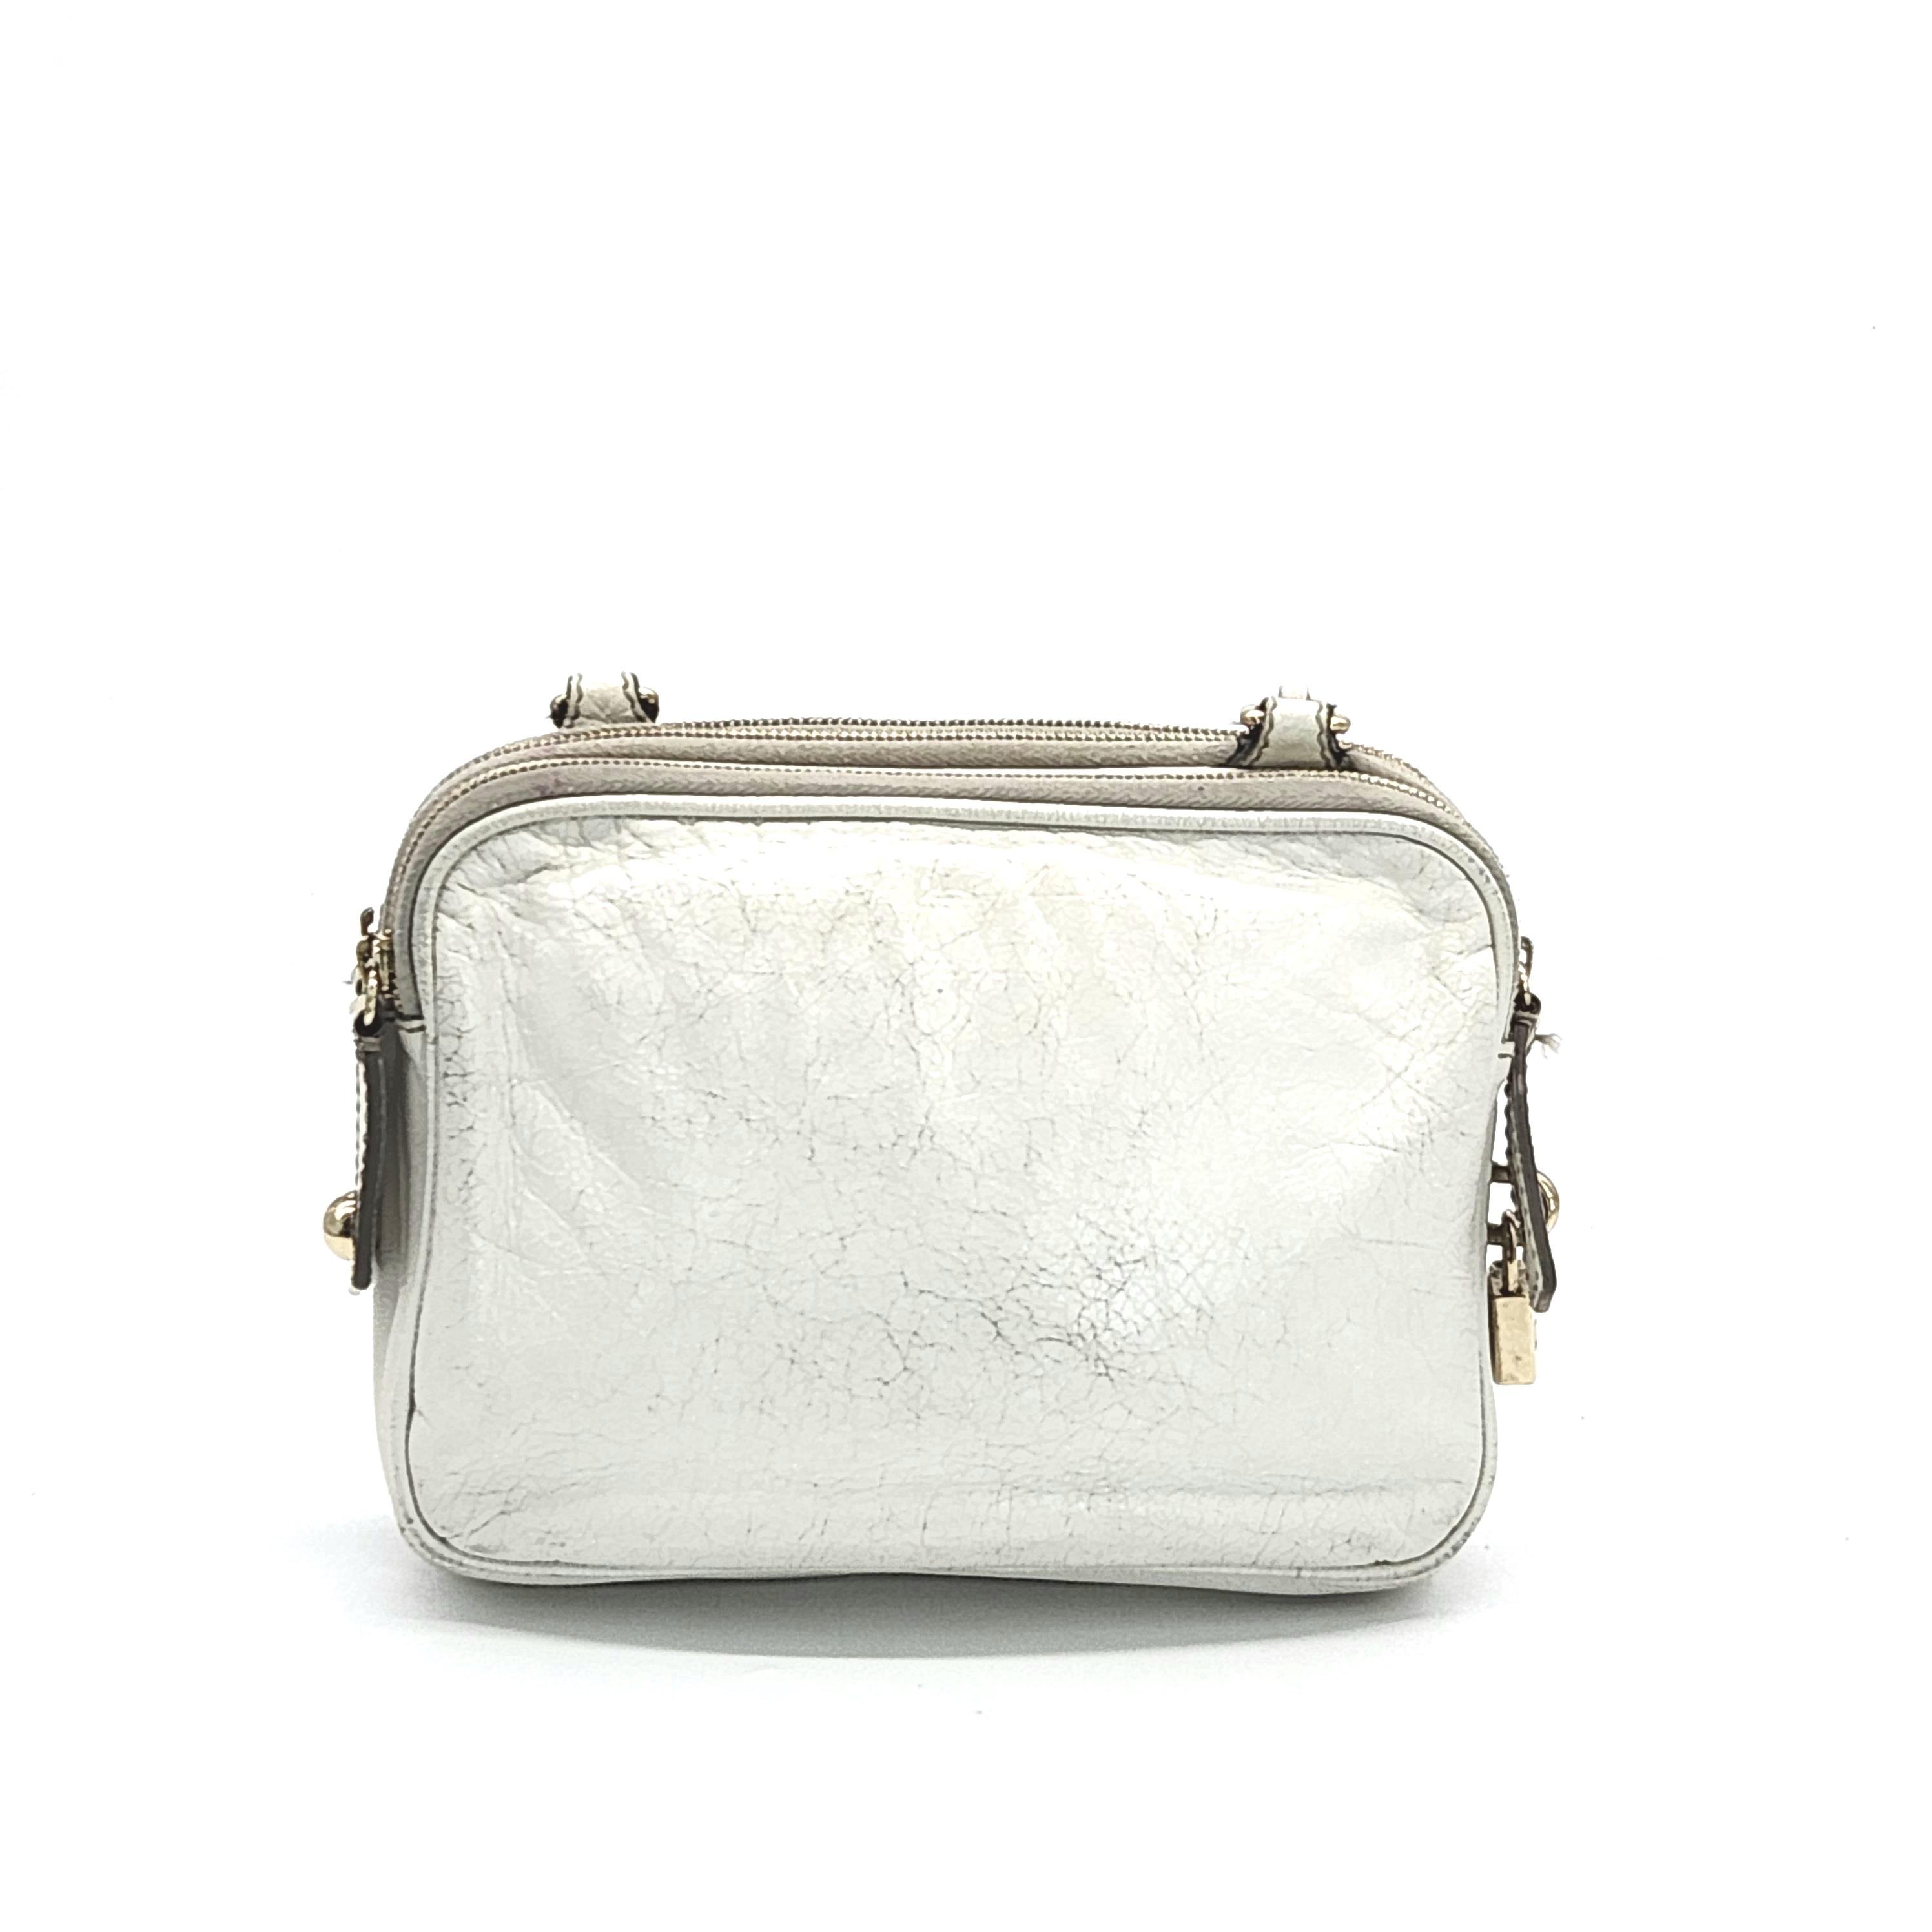 Dolce Gabbana White Leather Lily Bag